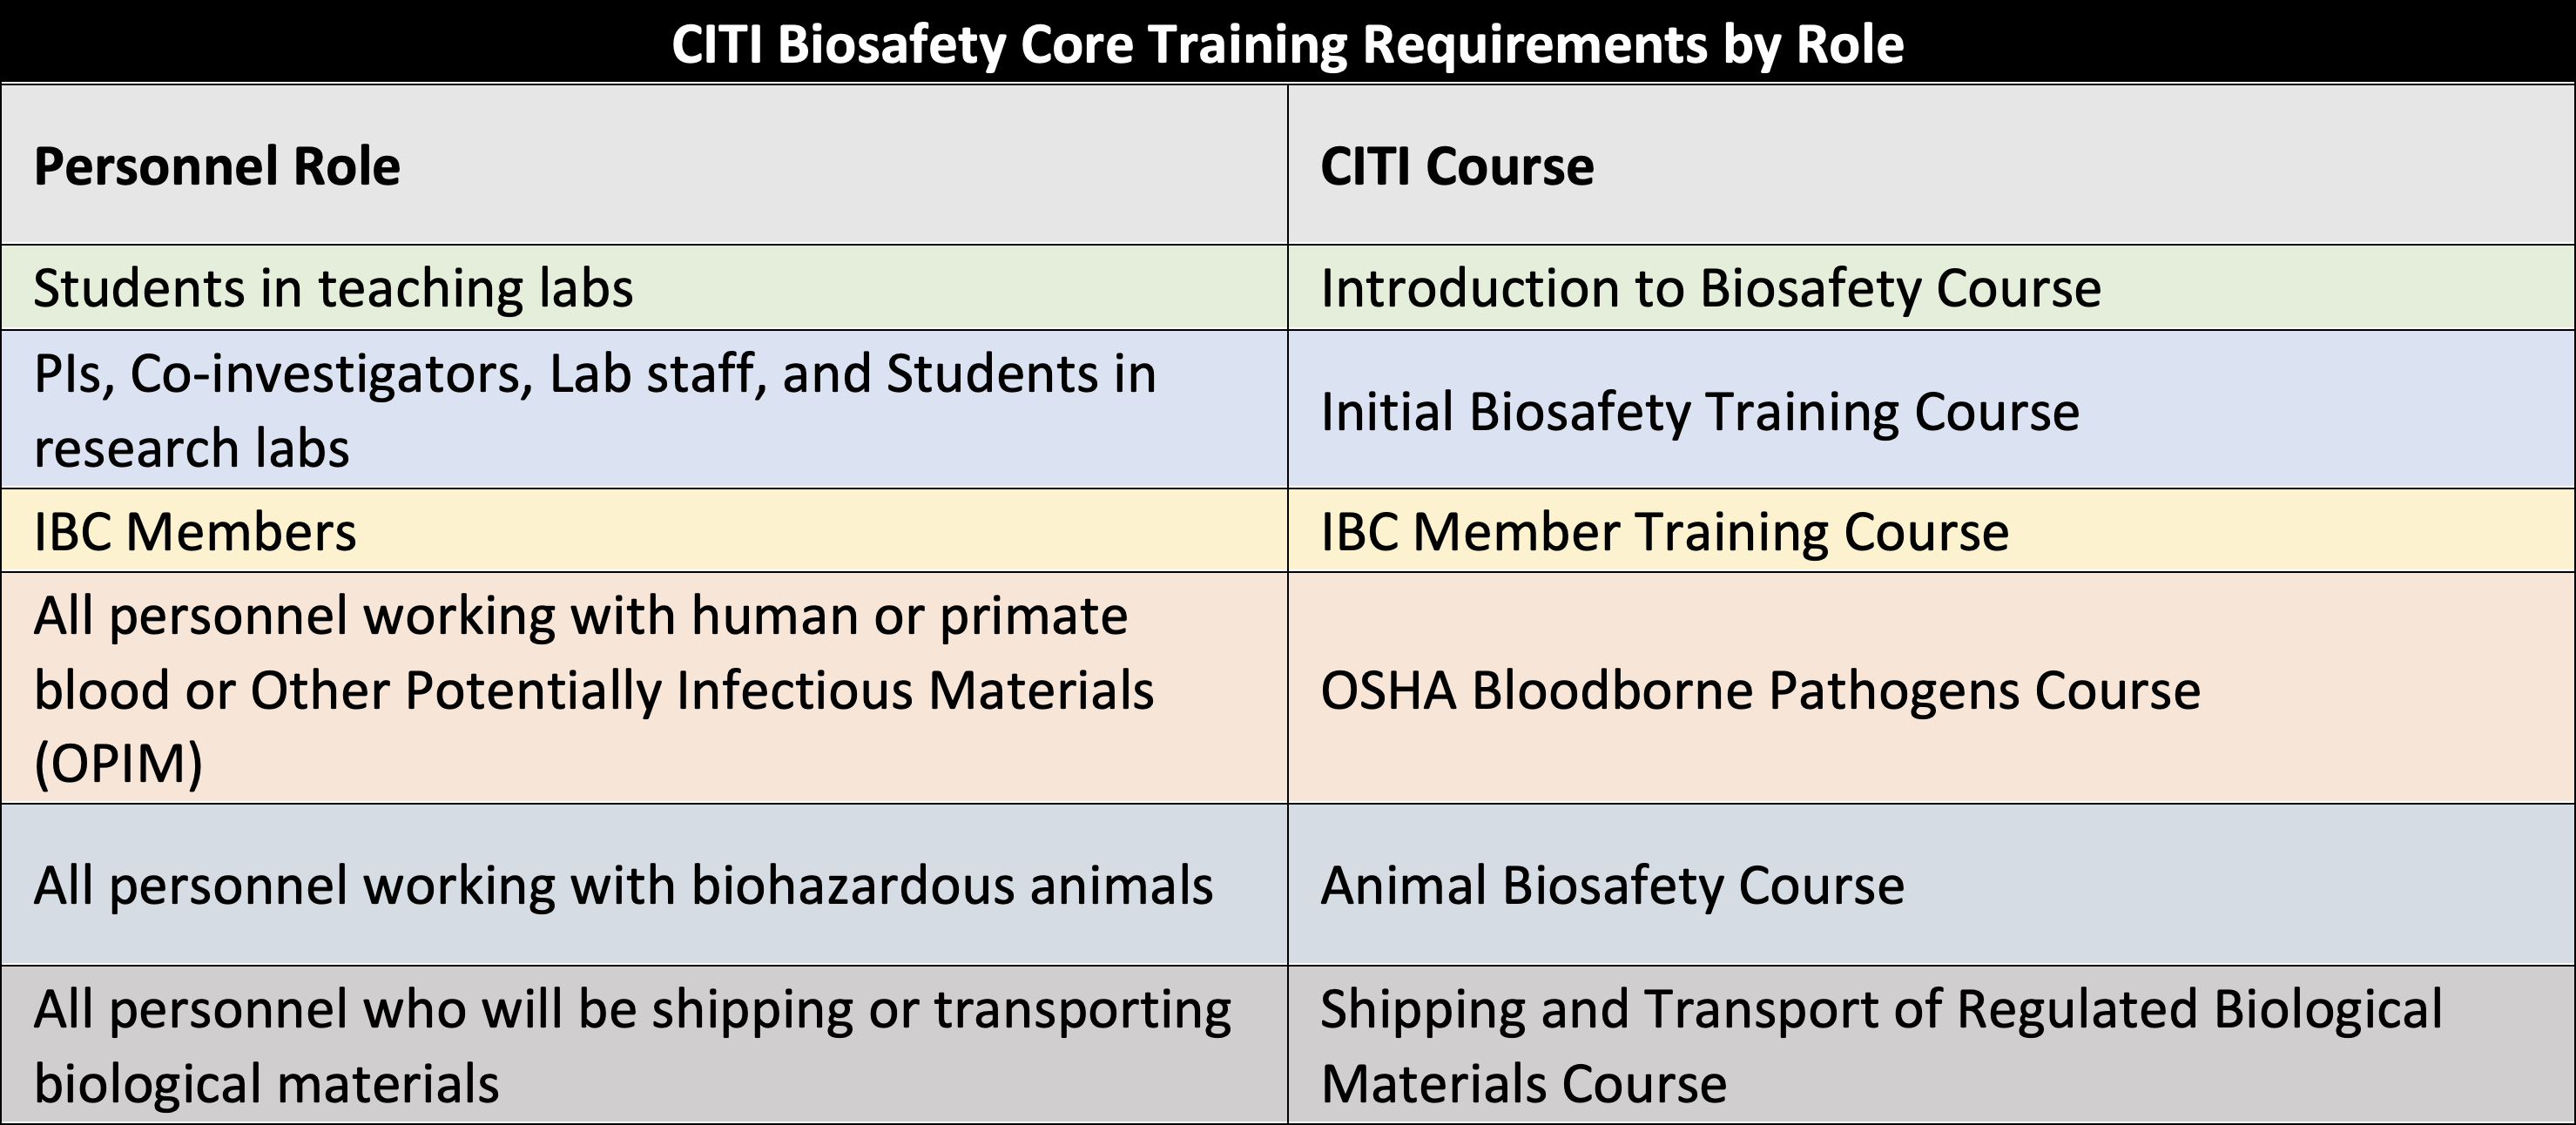 CITI Biosafety Core Training Requirements by Role